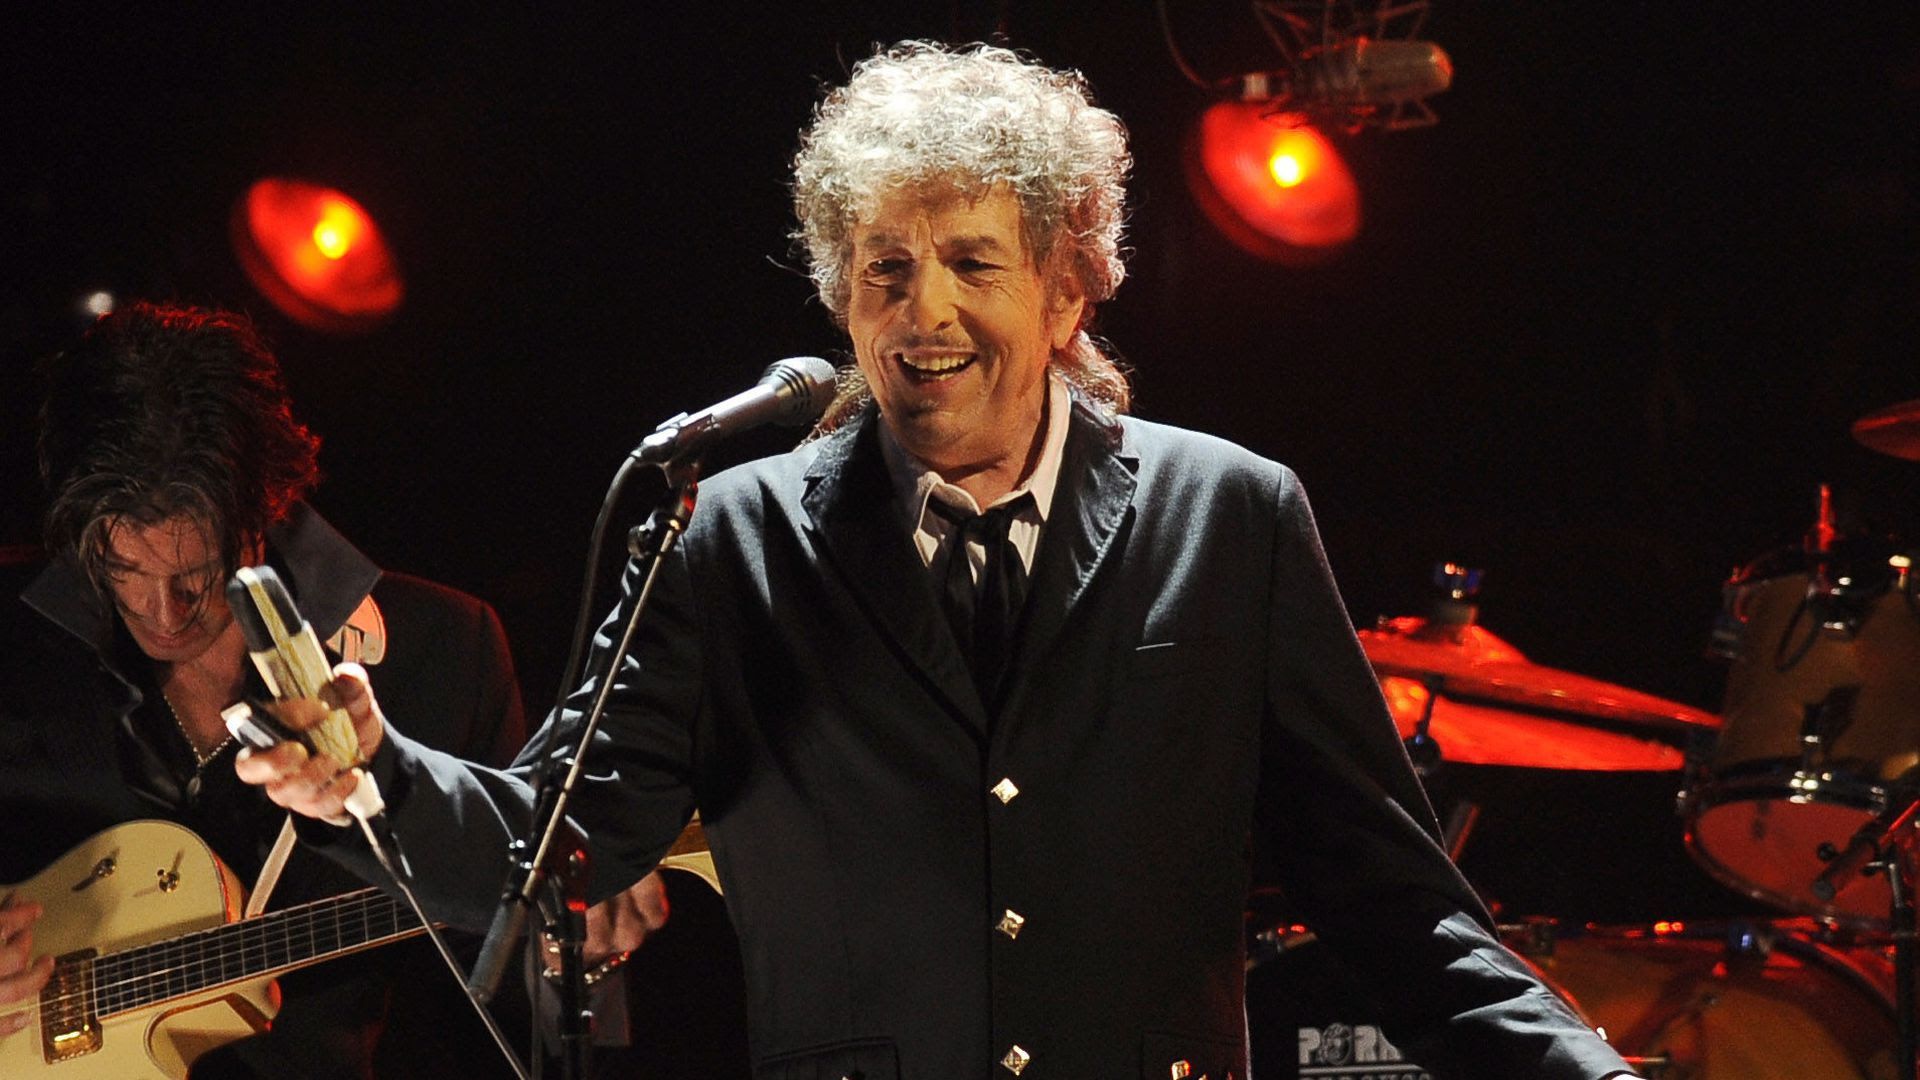 Bob Dylan on stage grinning and holding a microphone